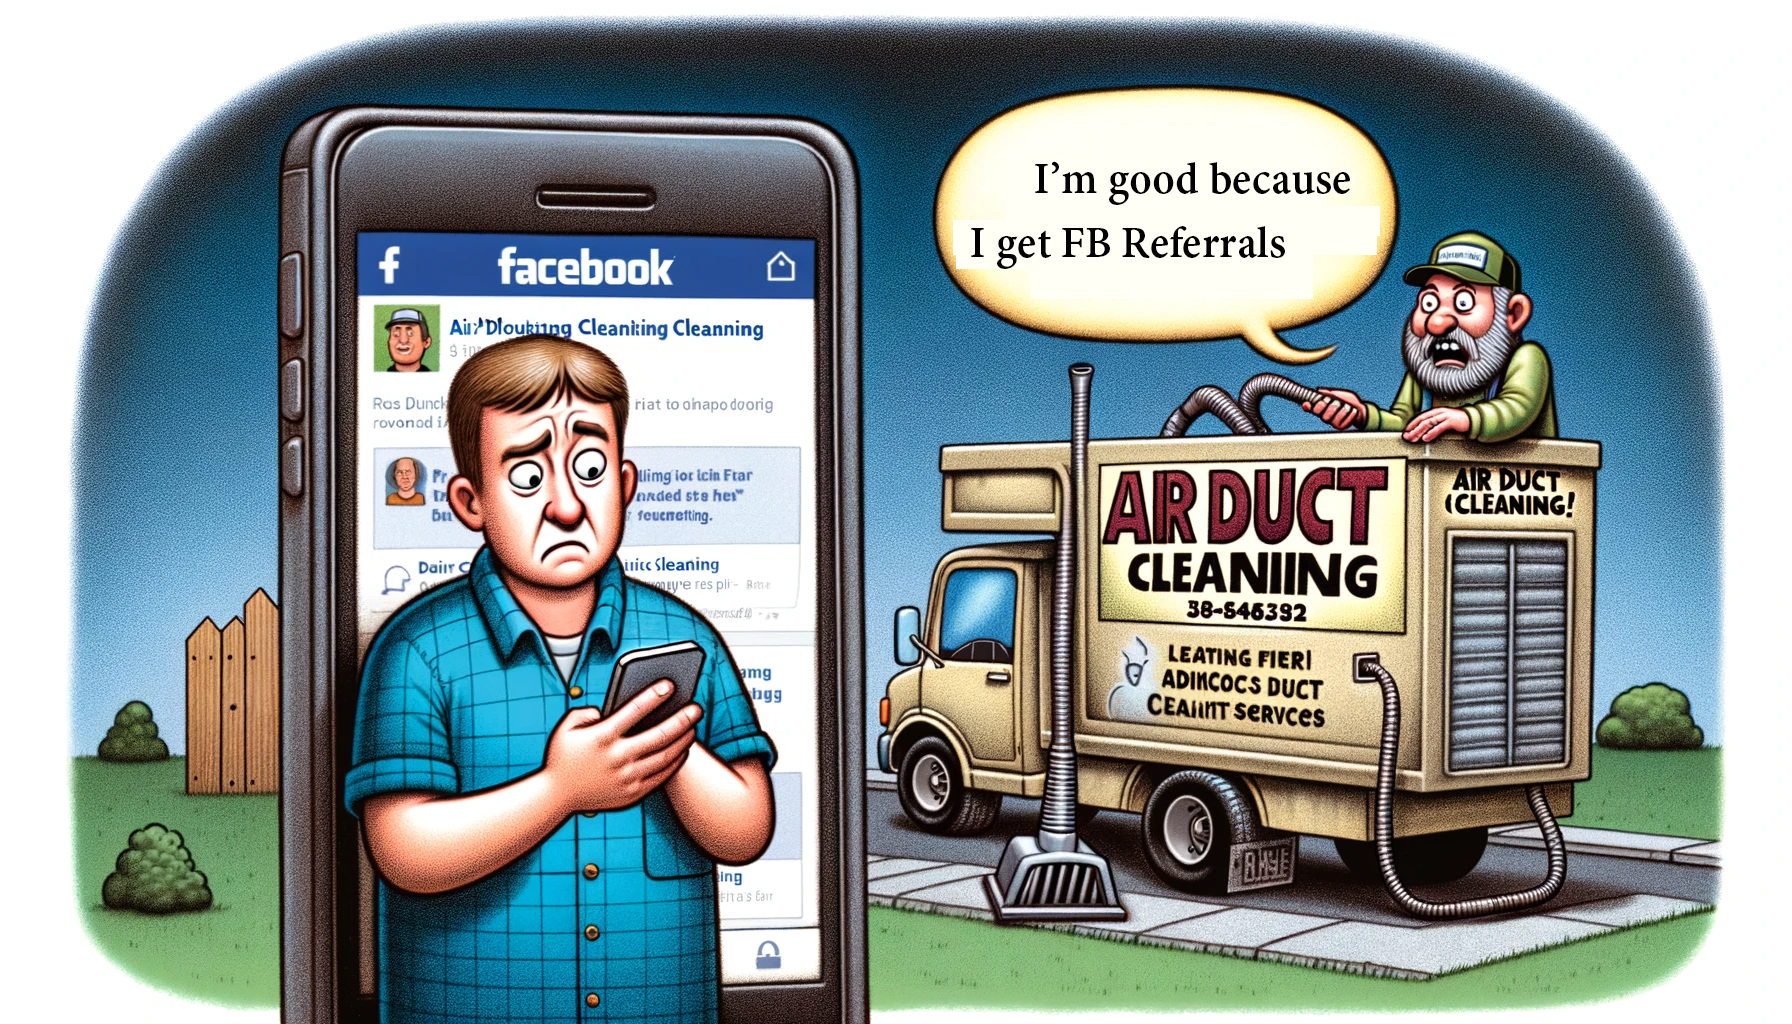 Beyond Facebook: Seeking Professional Duct Cleaning Referrals